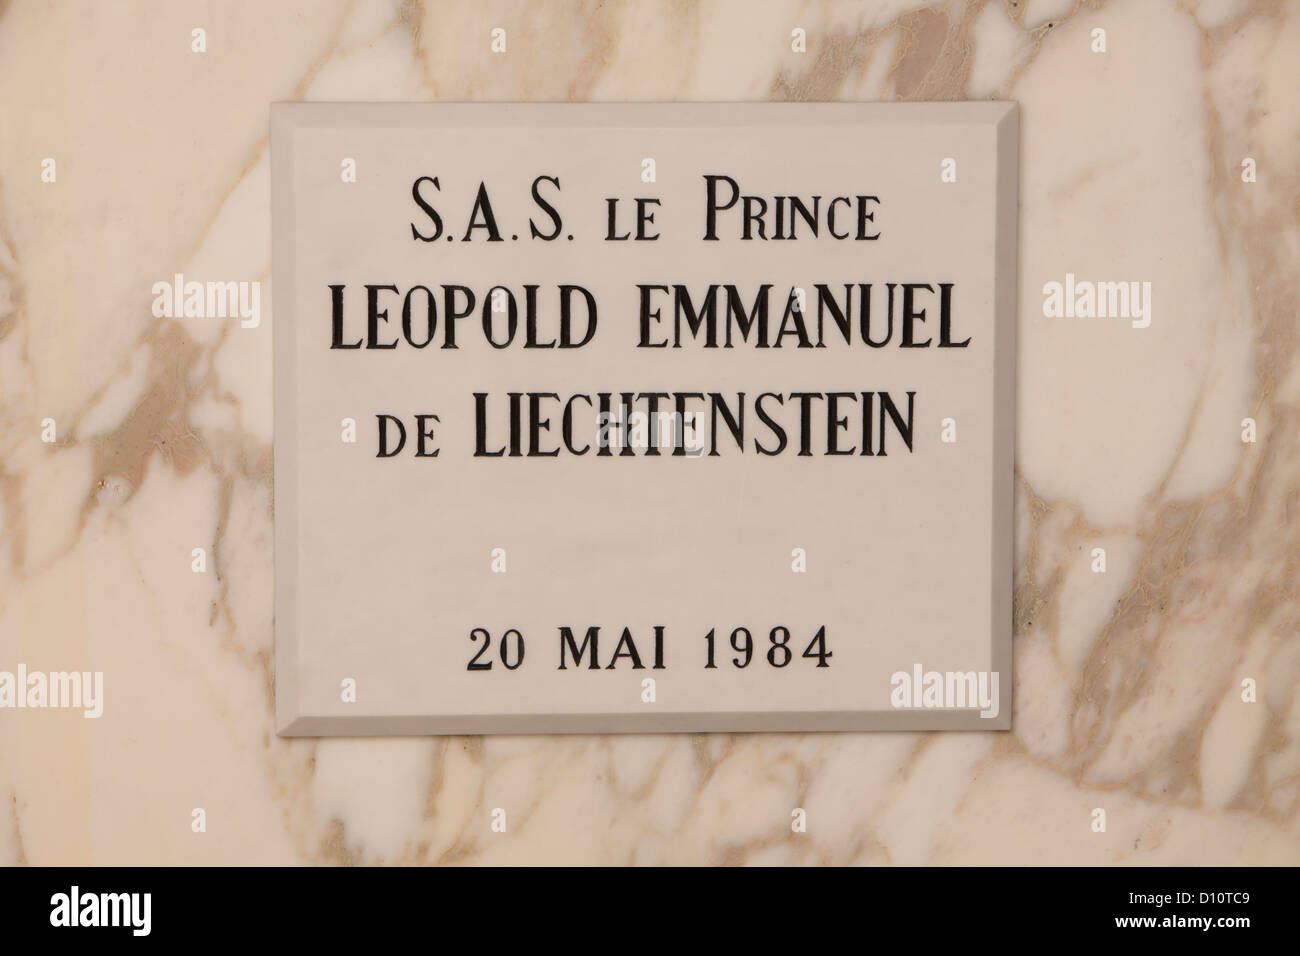 Tomb of Prince Leopold Emmanuel Jean Marie of Liechtenstein (1984-1984) at the Royal Crypt in Laeken, Belgium Stock Photo